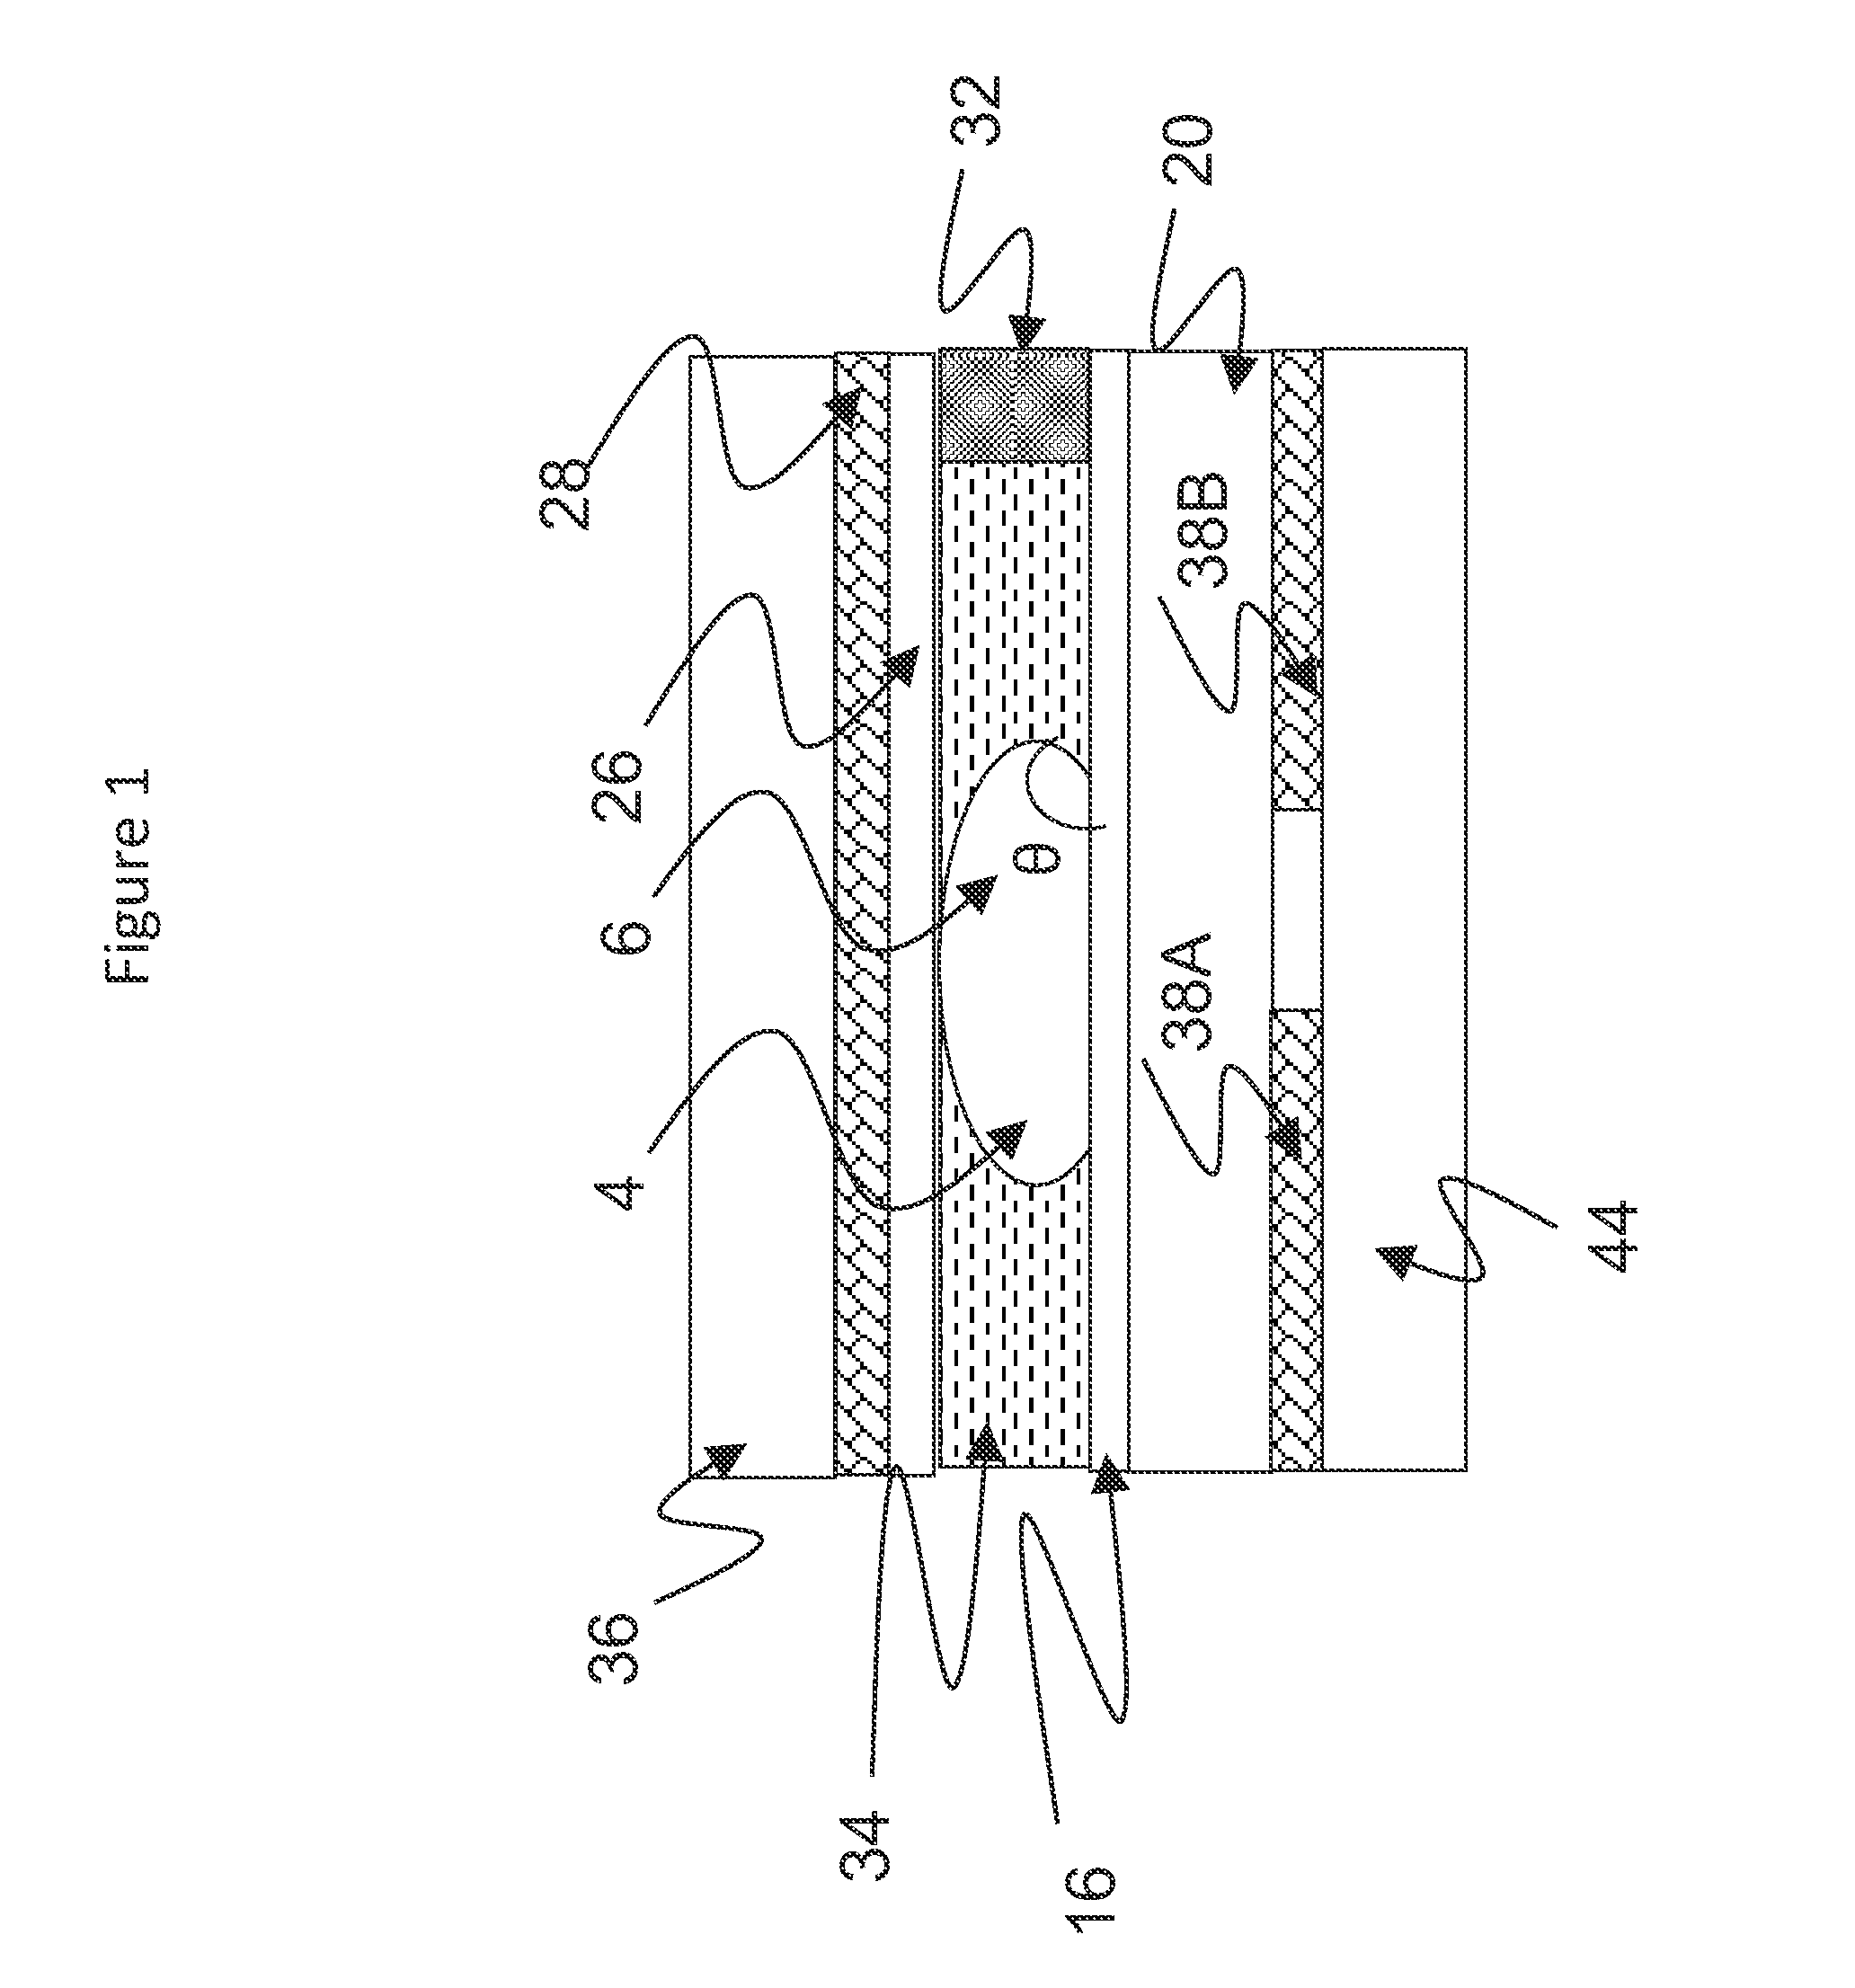 Microfluidic system with metered fluid loading system for microfluidic device